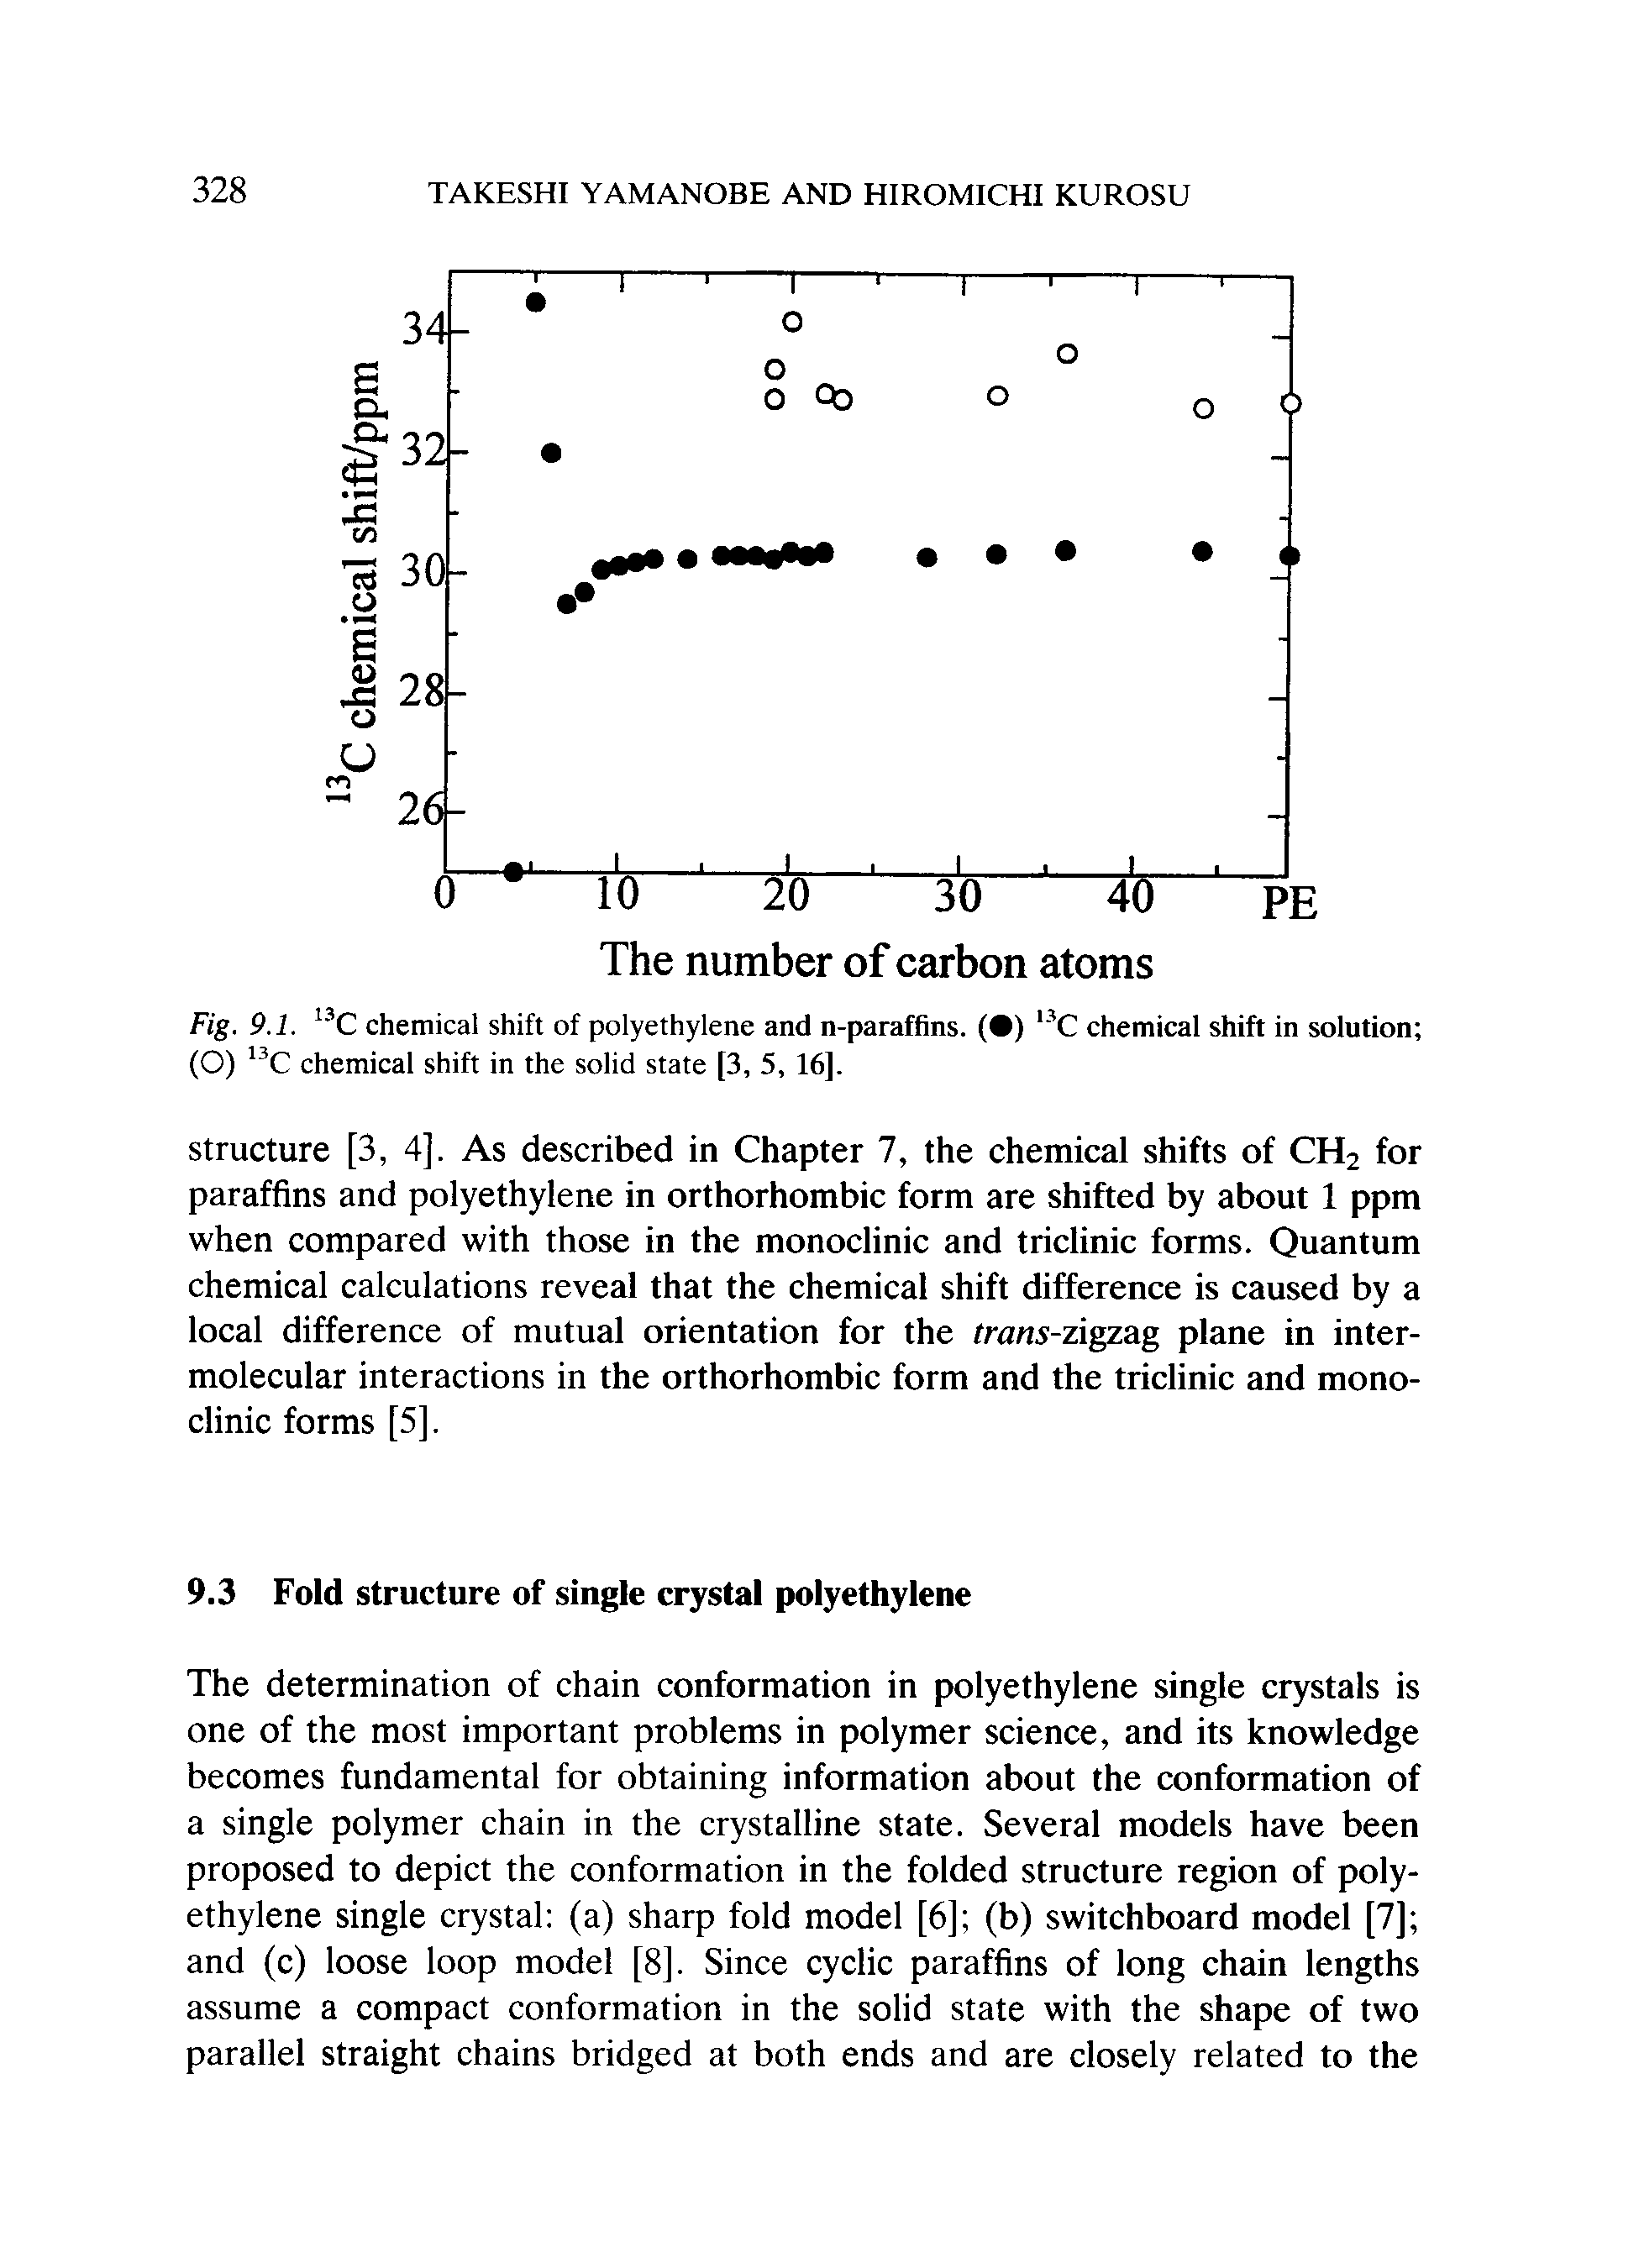 Fig. 9.1. C chemical shift of polyethylene and n-paraffins. ( ) C chemical shift in solution (O) chemical shift in the solid state [3, 5, 16].